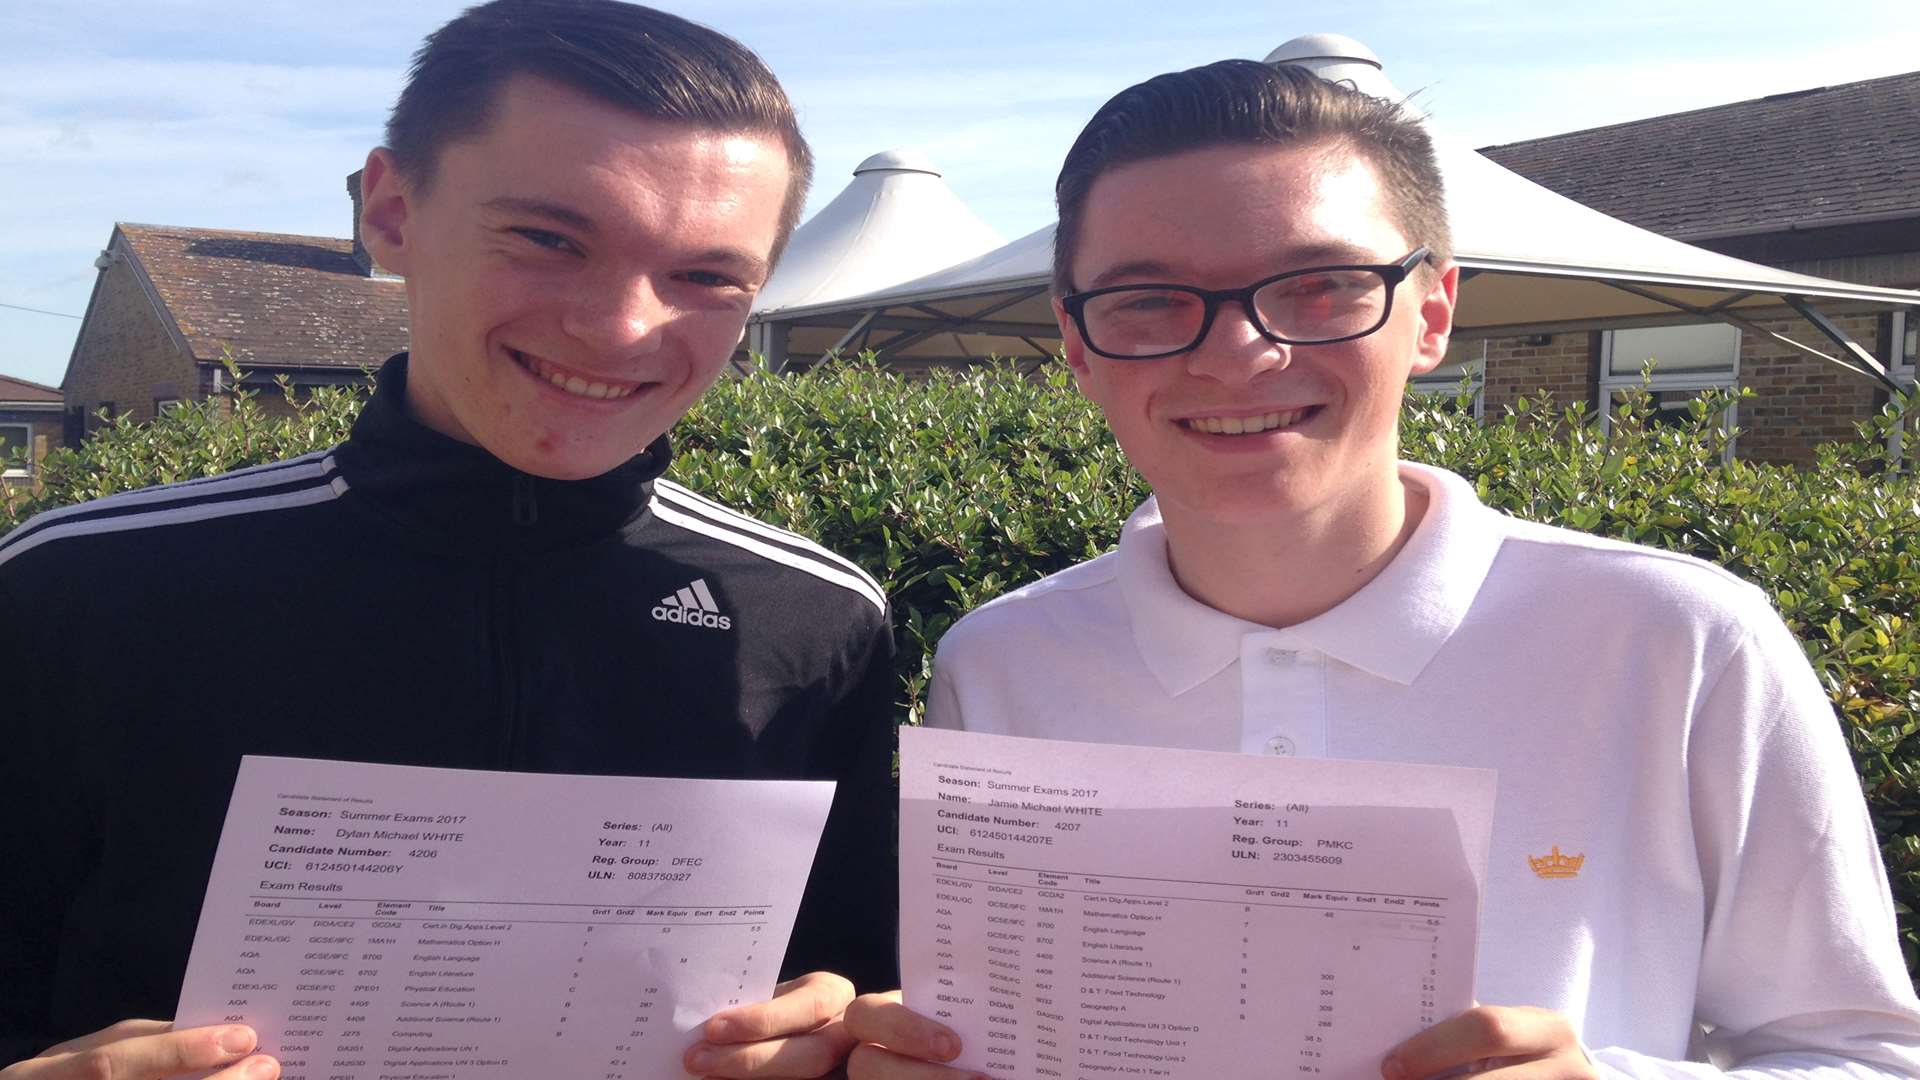 At Thomas Aveling School, twins Dylan and Jamie White almost got identical marks